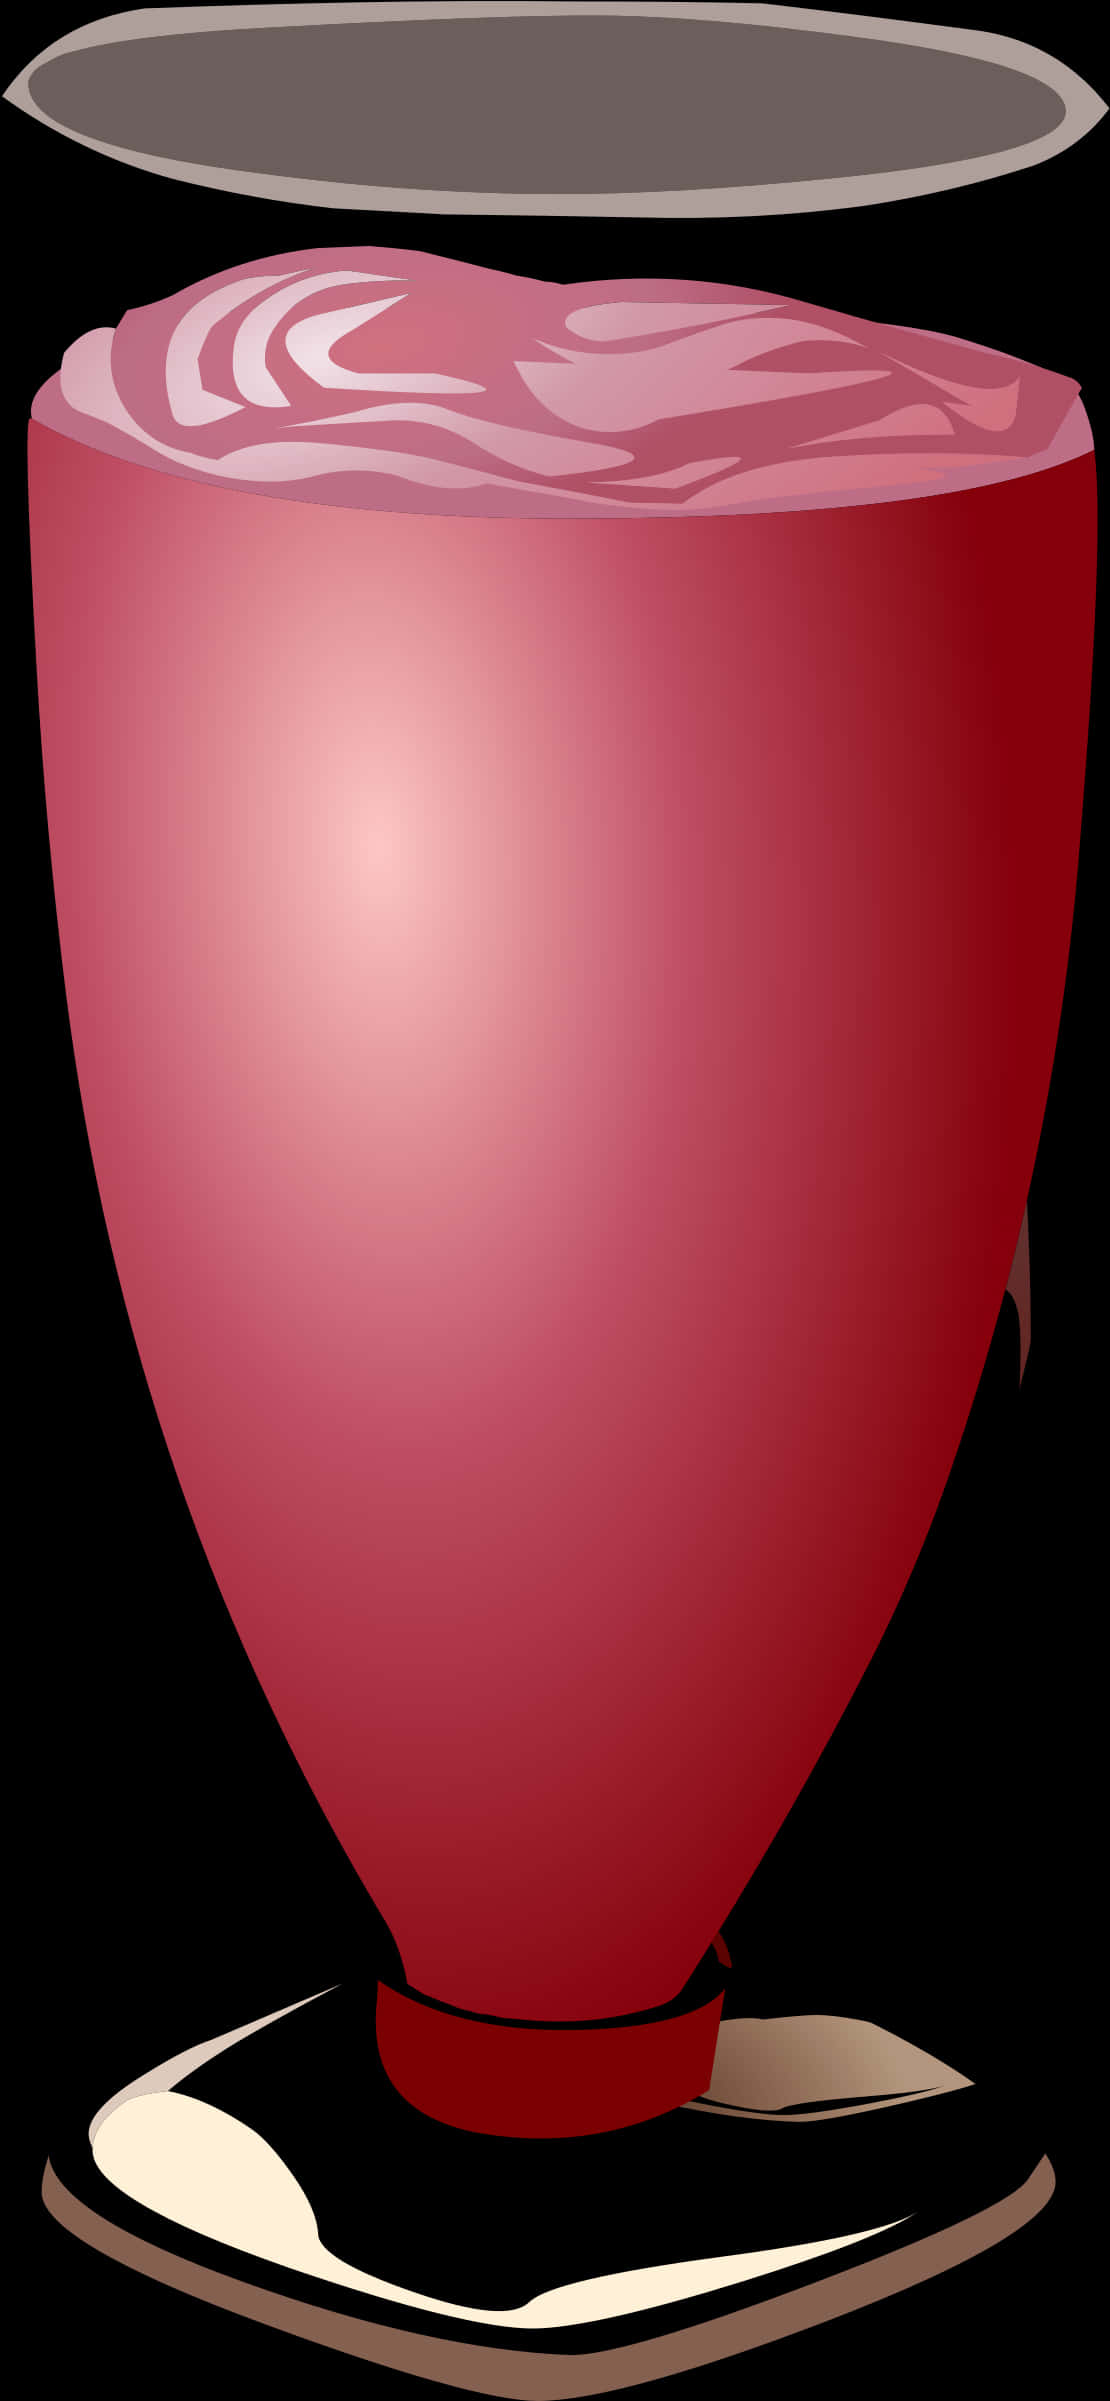 A Red Object With Black Background